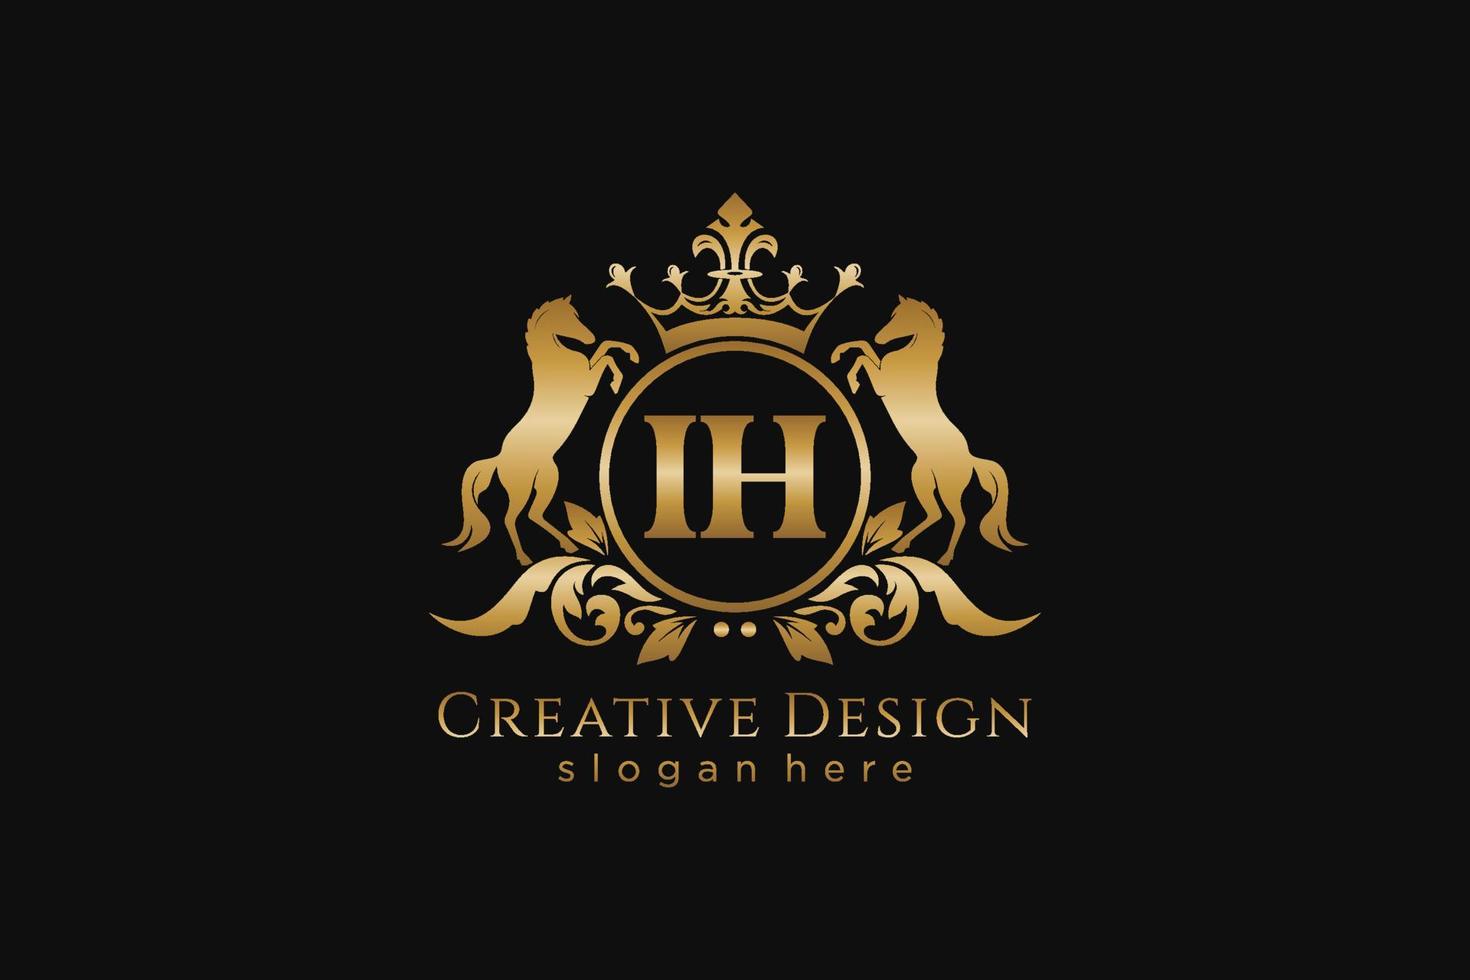 initial IH Retro golden crest with circle and two horses, badge template with scrolls and royal crown - perfect for luxurious branding projects vector